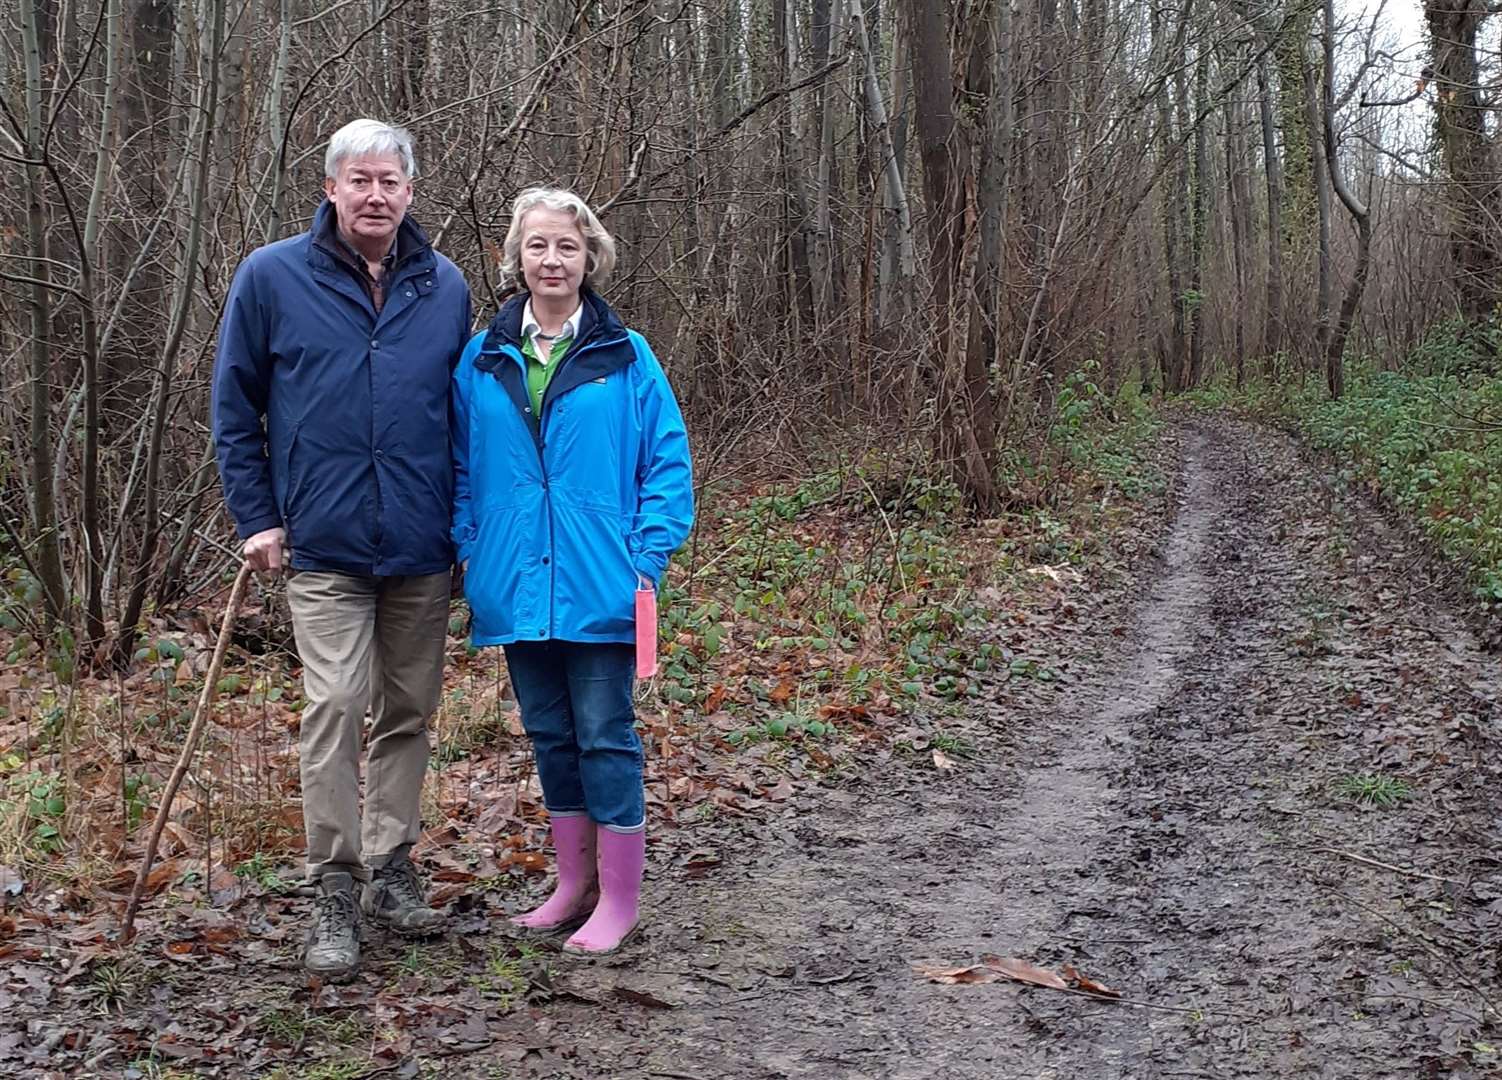 David and Jilly Bradshaw in Pitt Wood Aylesham which they fear could be carved up into small, private plots